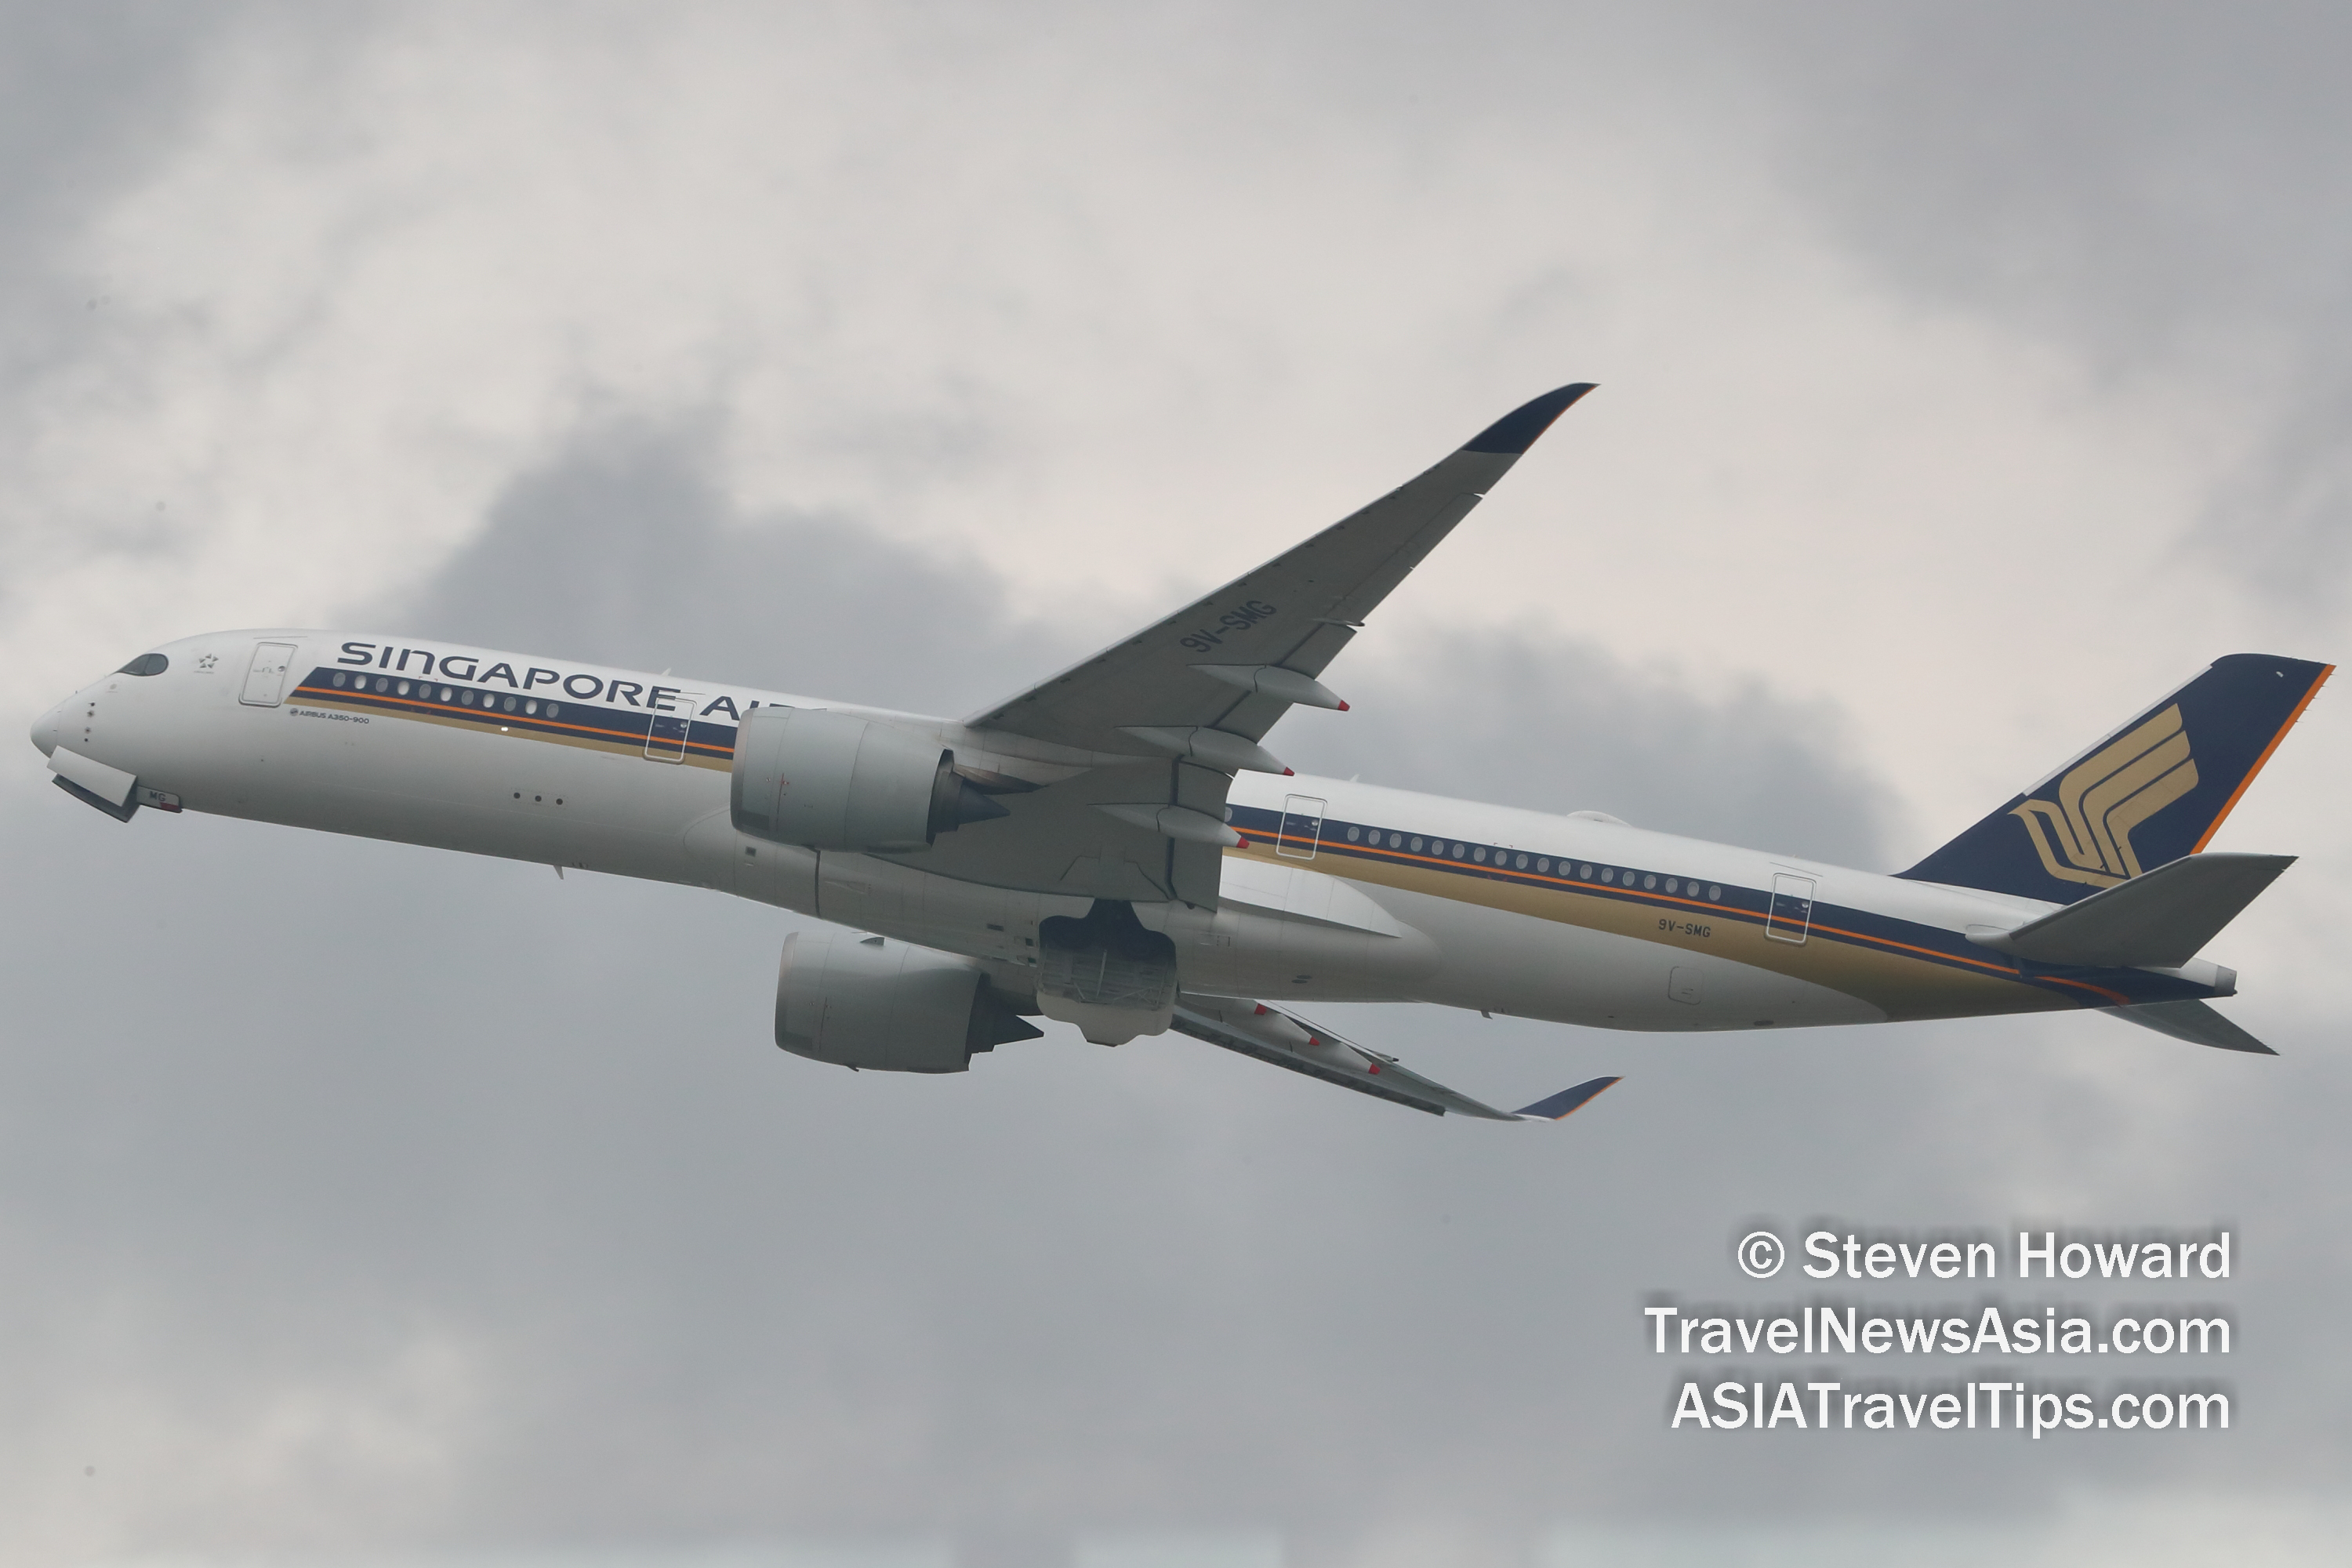 Singapore Airlines A350-900 reg: 9VSMG taking off from HKIA. Picture by Steven Howard of TravelNewsAsia.com Click to enlarge.